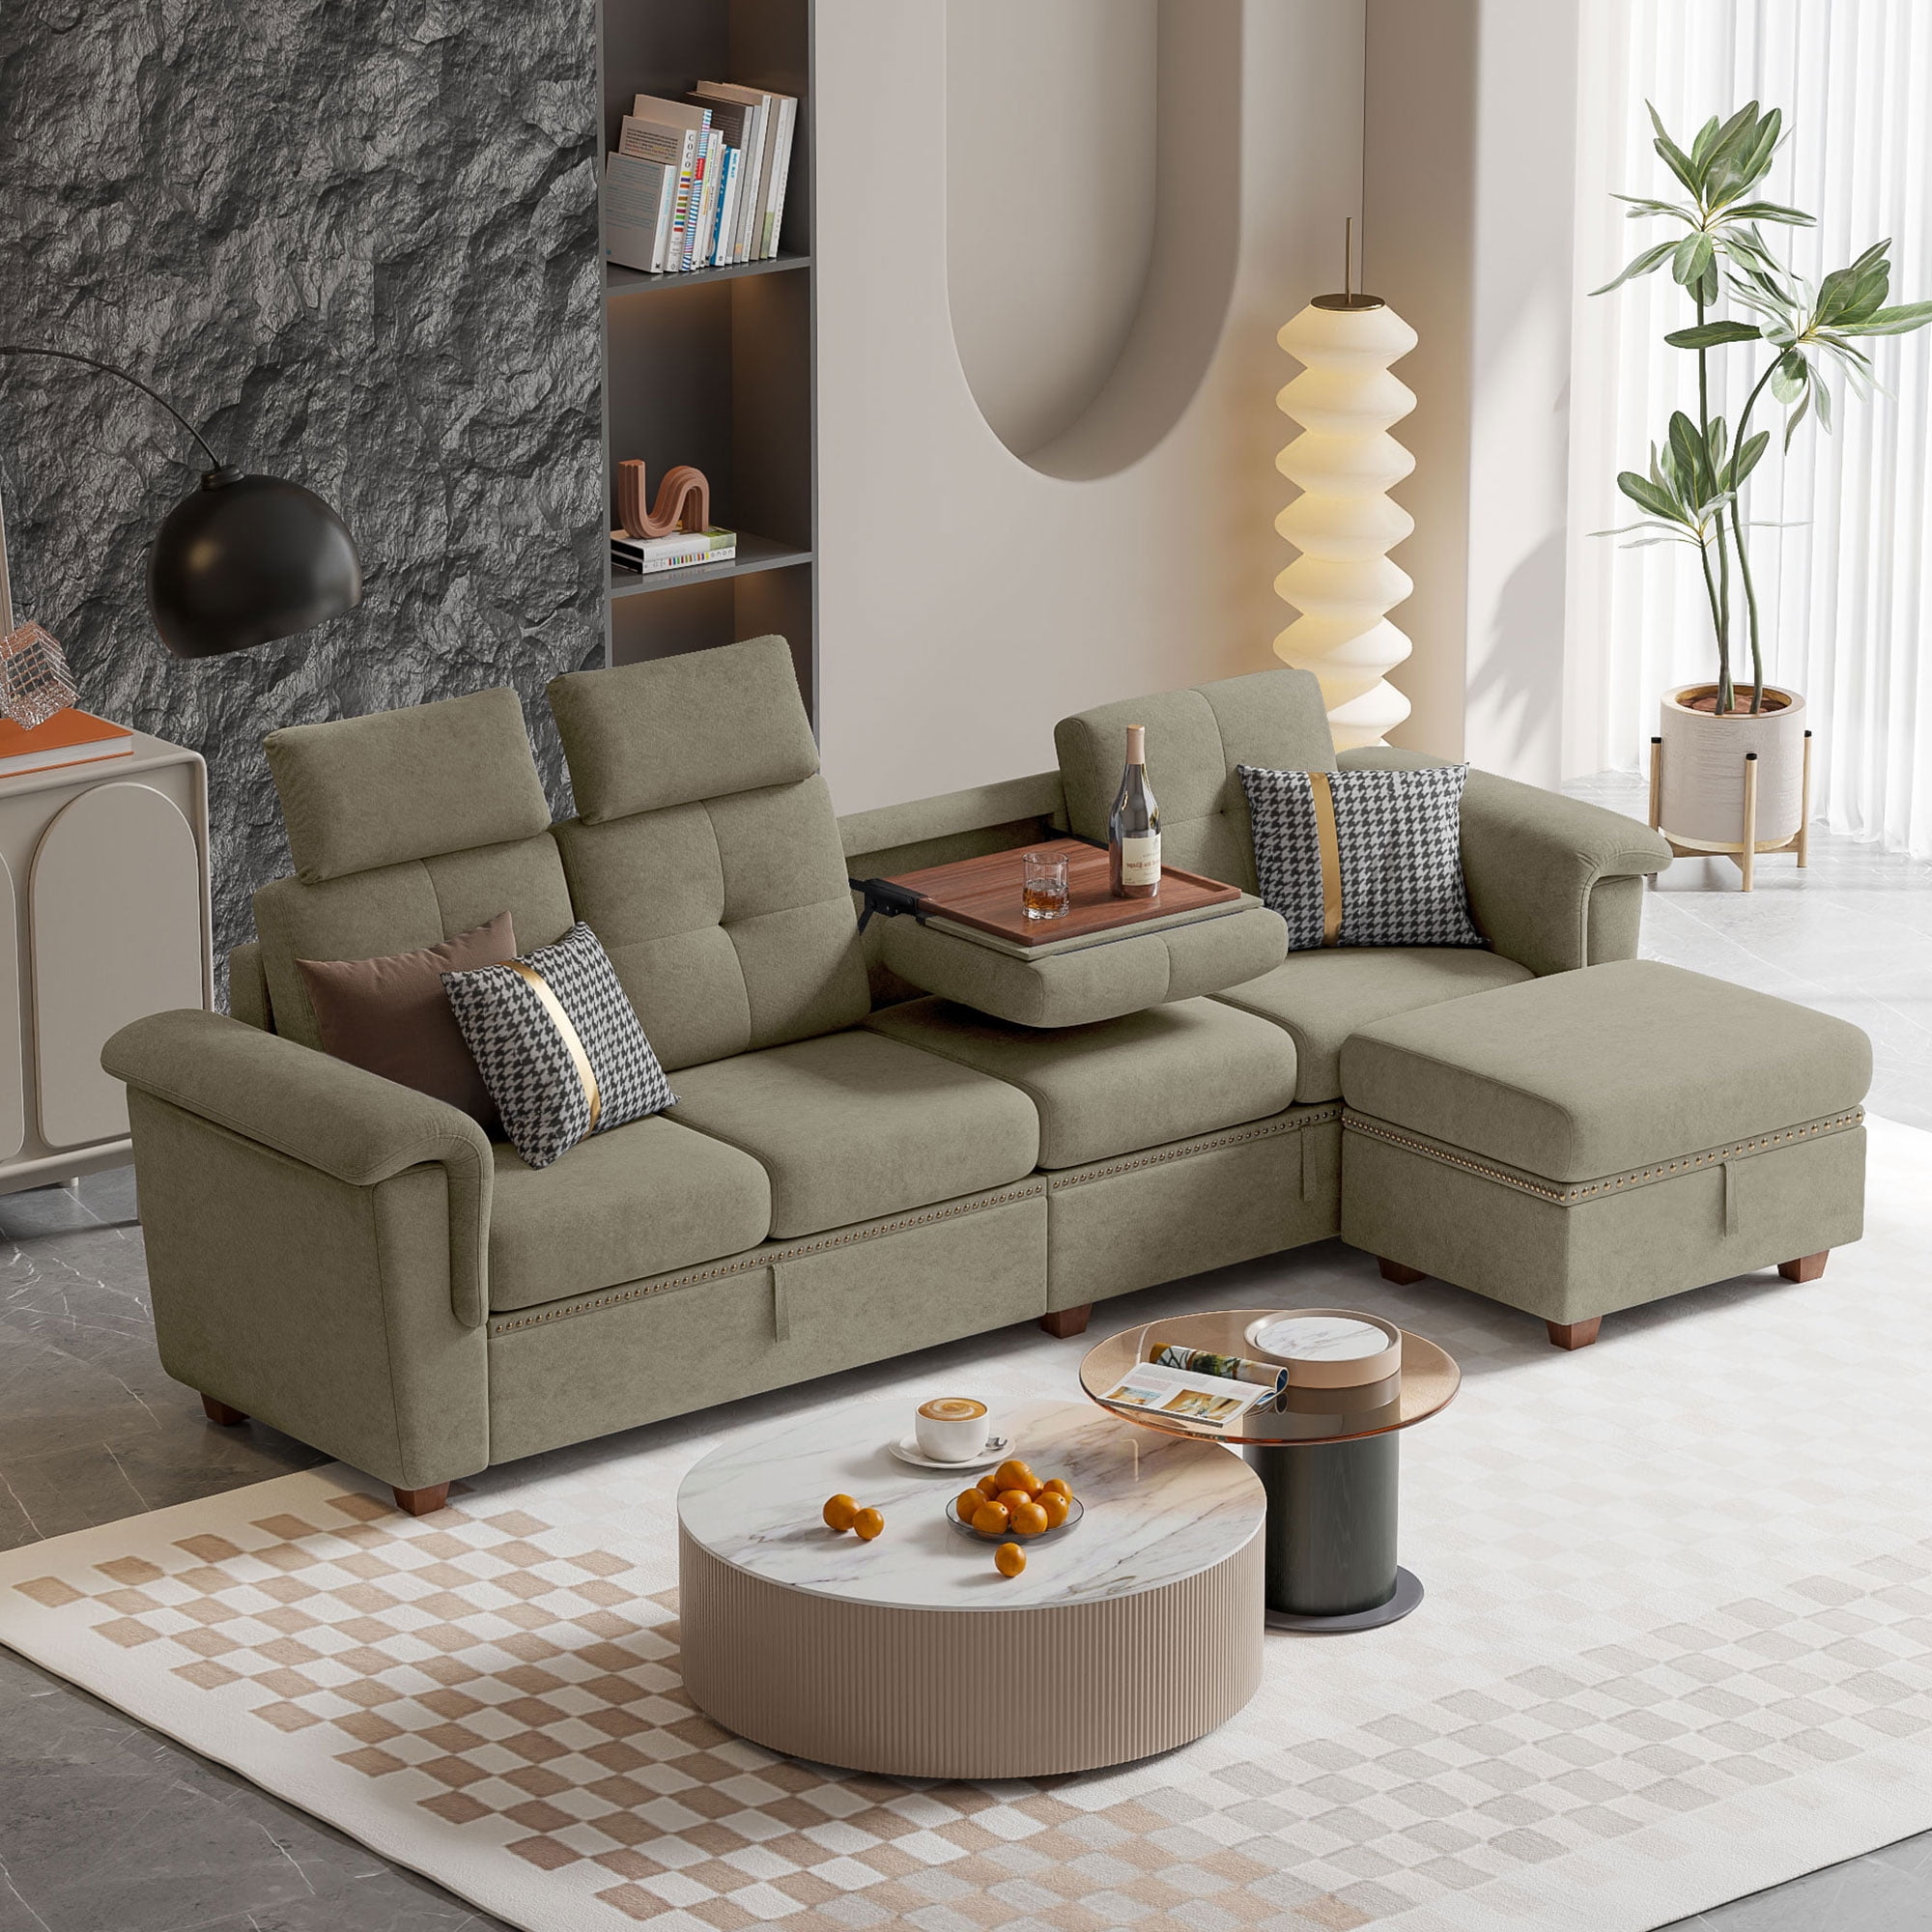 Jarenie Sectional Sofa, High Back Sectional Couch with Ottoman, Storage bag  Storage ottoman, L-shaped Sofa with Extra Headrests, 4-Seat Convertible Sofa  for Living Room, apartment, Light Gray. 